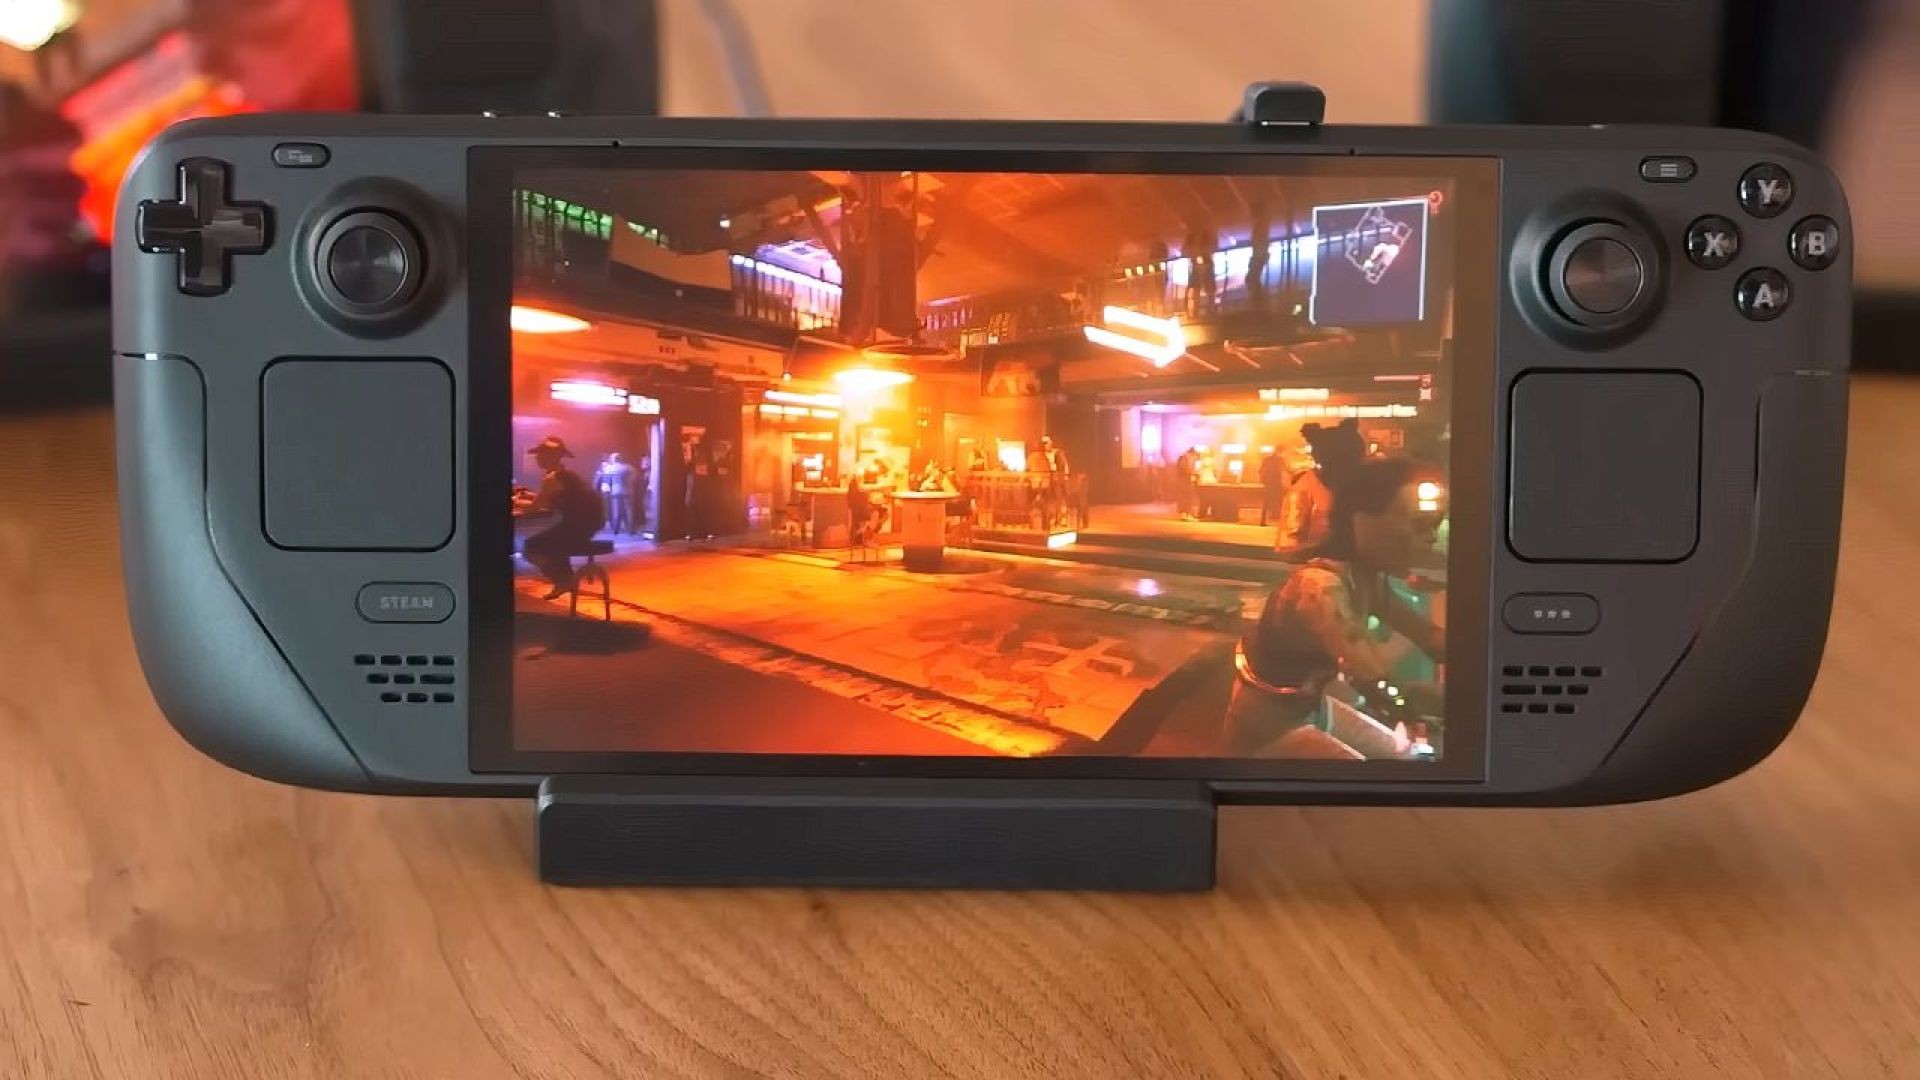 Steam Deck OLED: The Next-Level Gaming Handheld